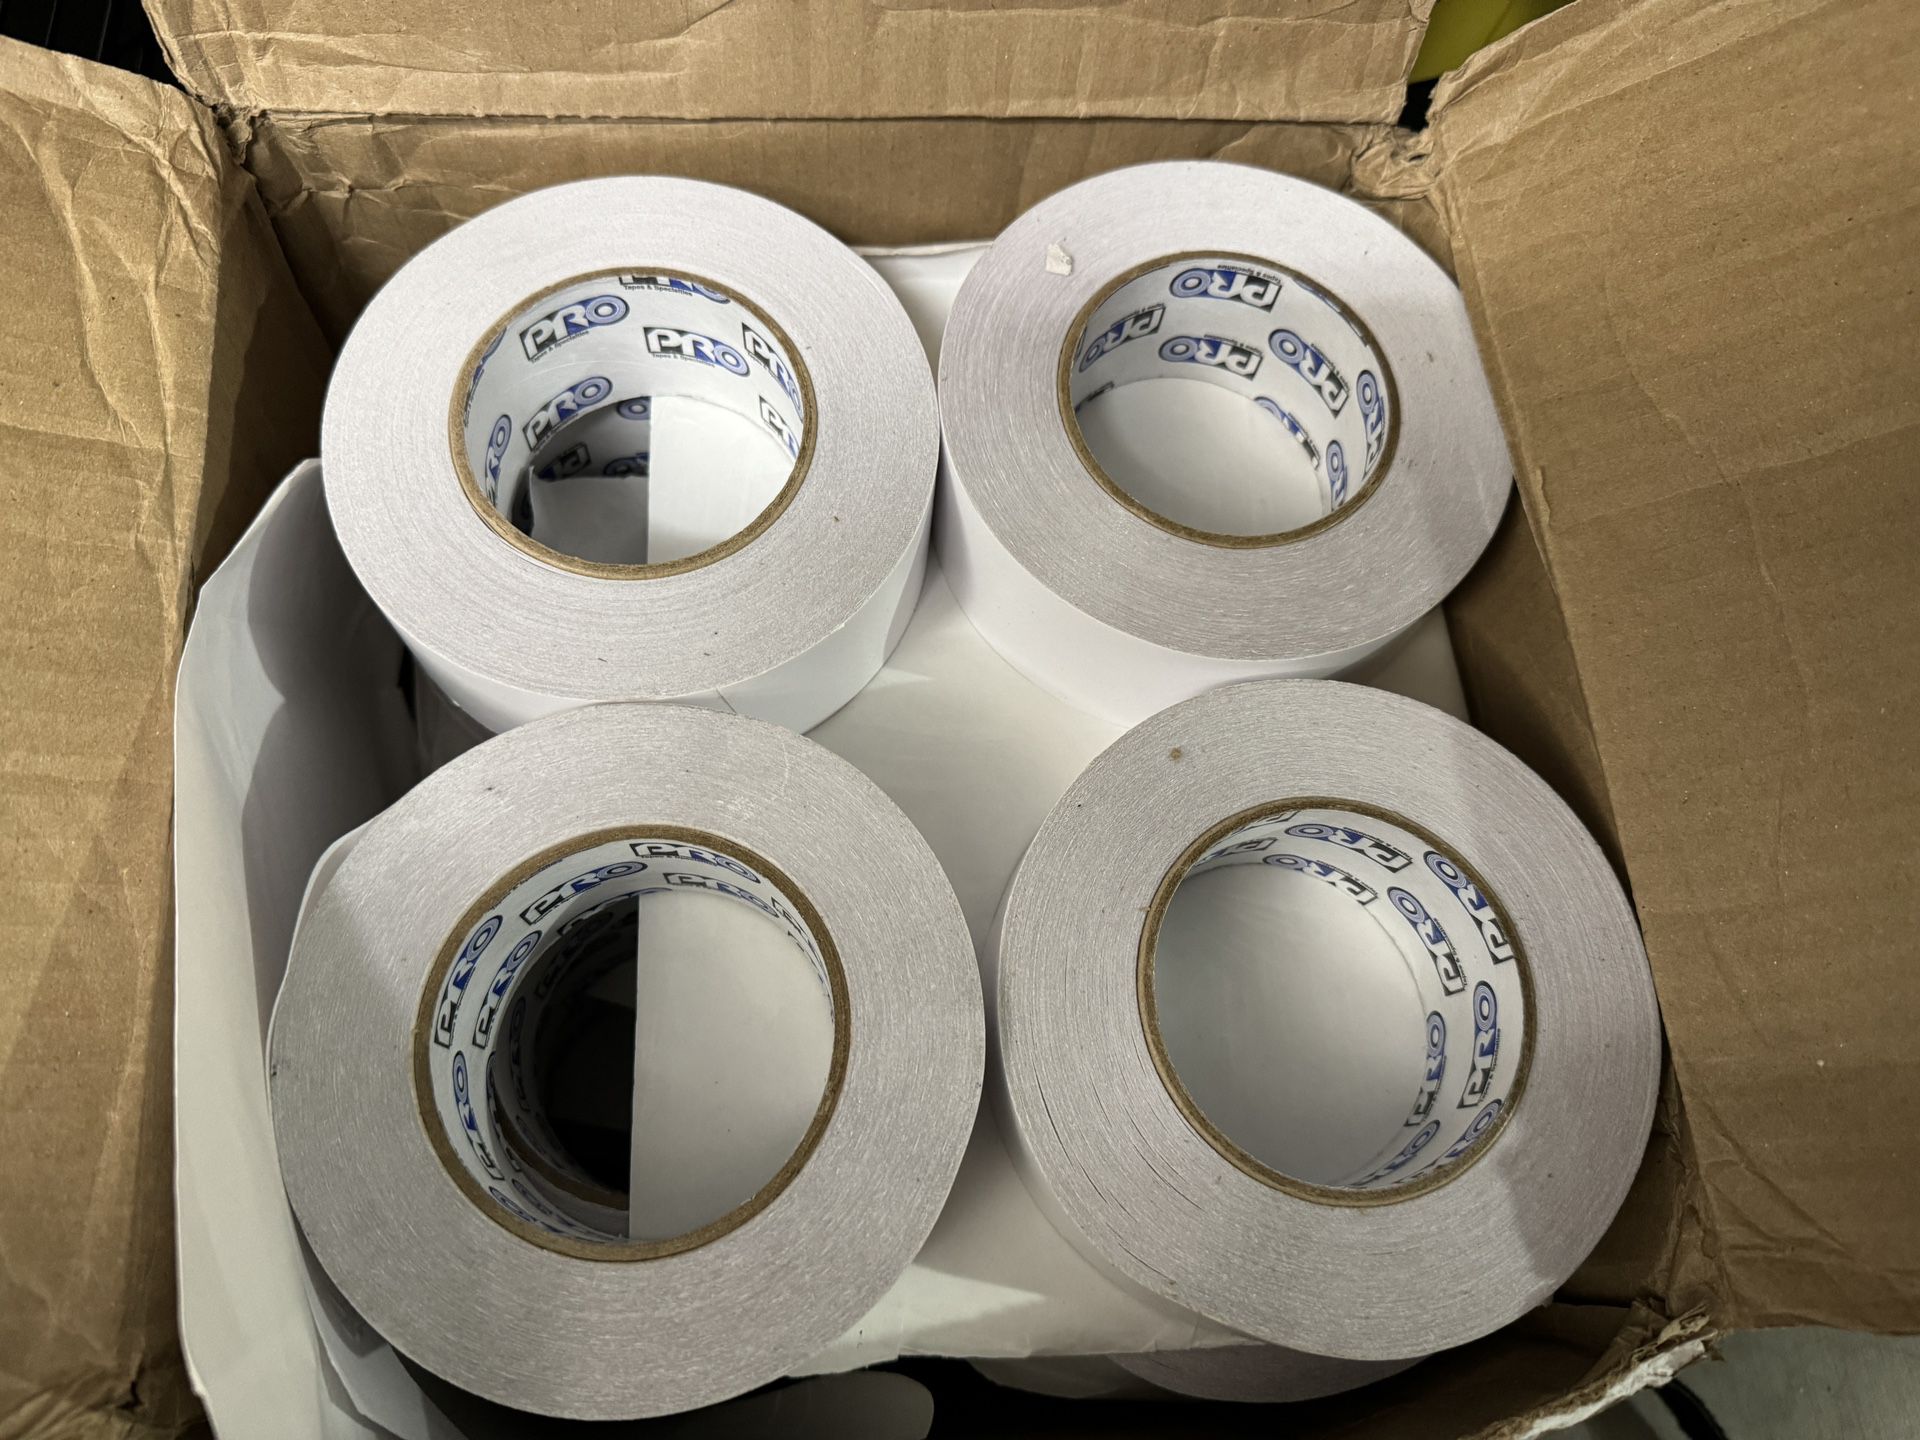 Box Of 24 - Acrylic DOUBLE COATED Multi Purpose Polyester Tape 55yds x 2” x 4mils 